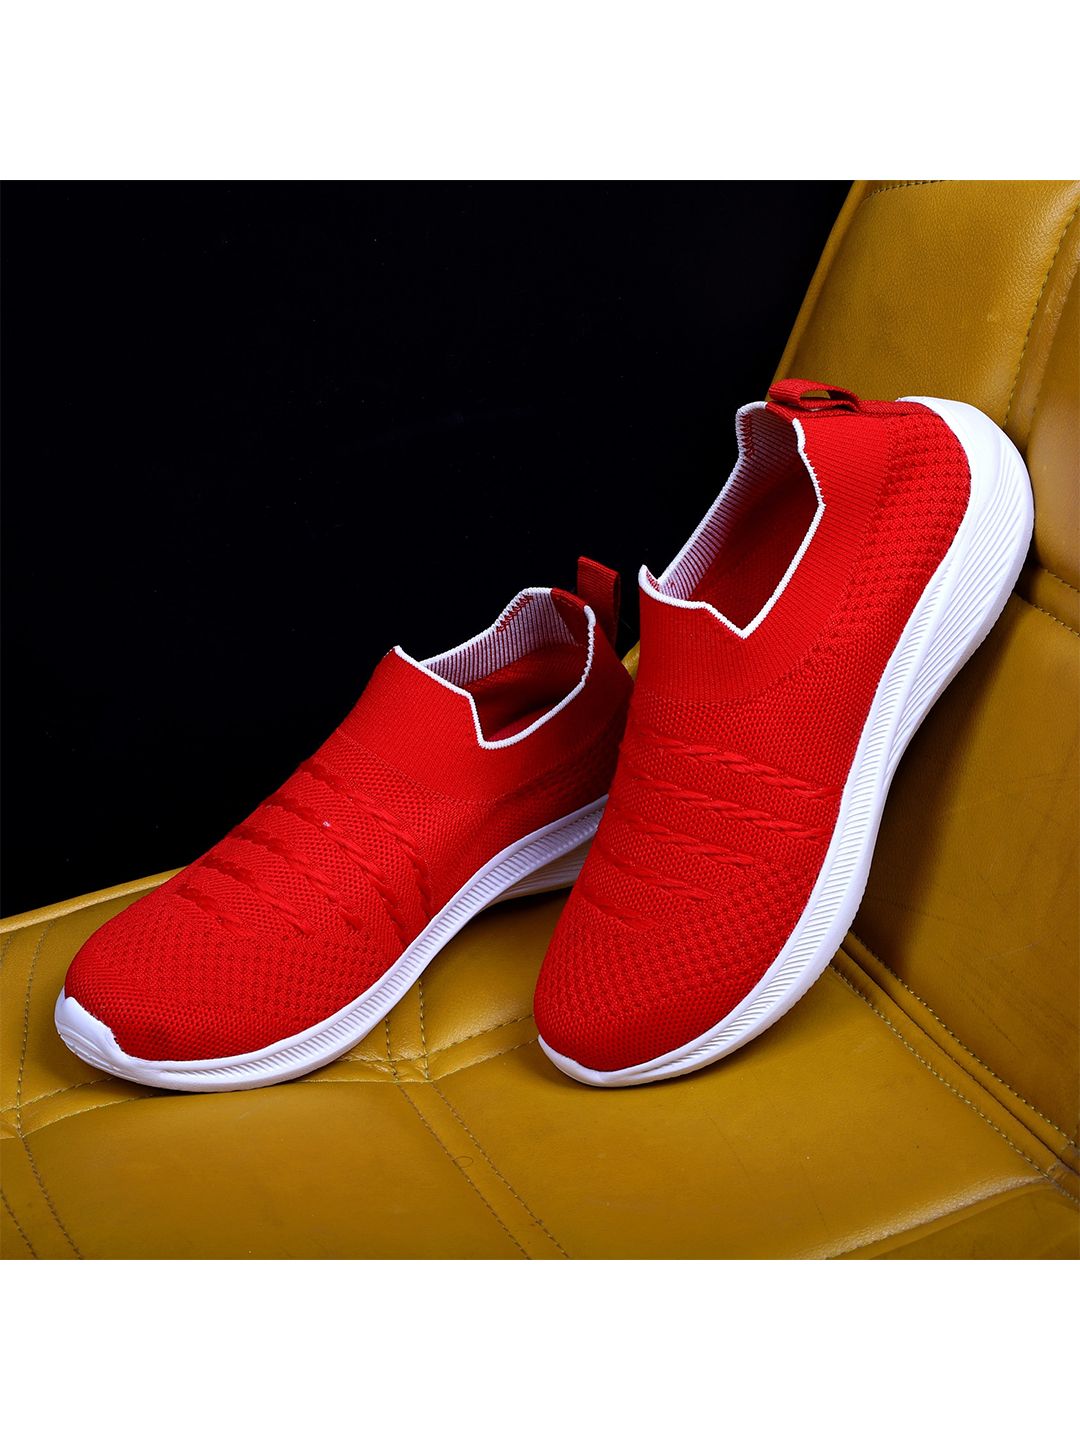 TPENT Women Red Mesh Running Non-Marking Shoes Price in India